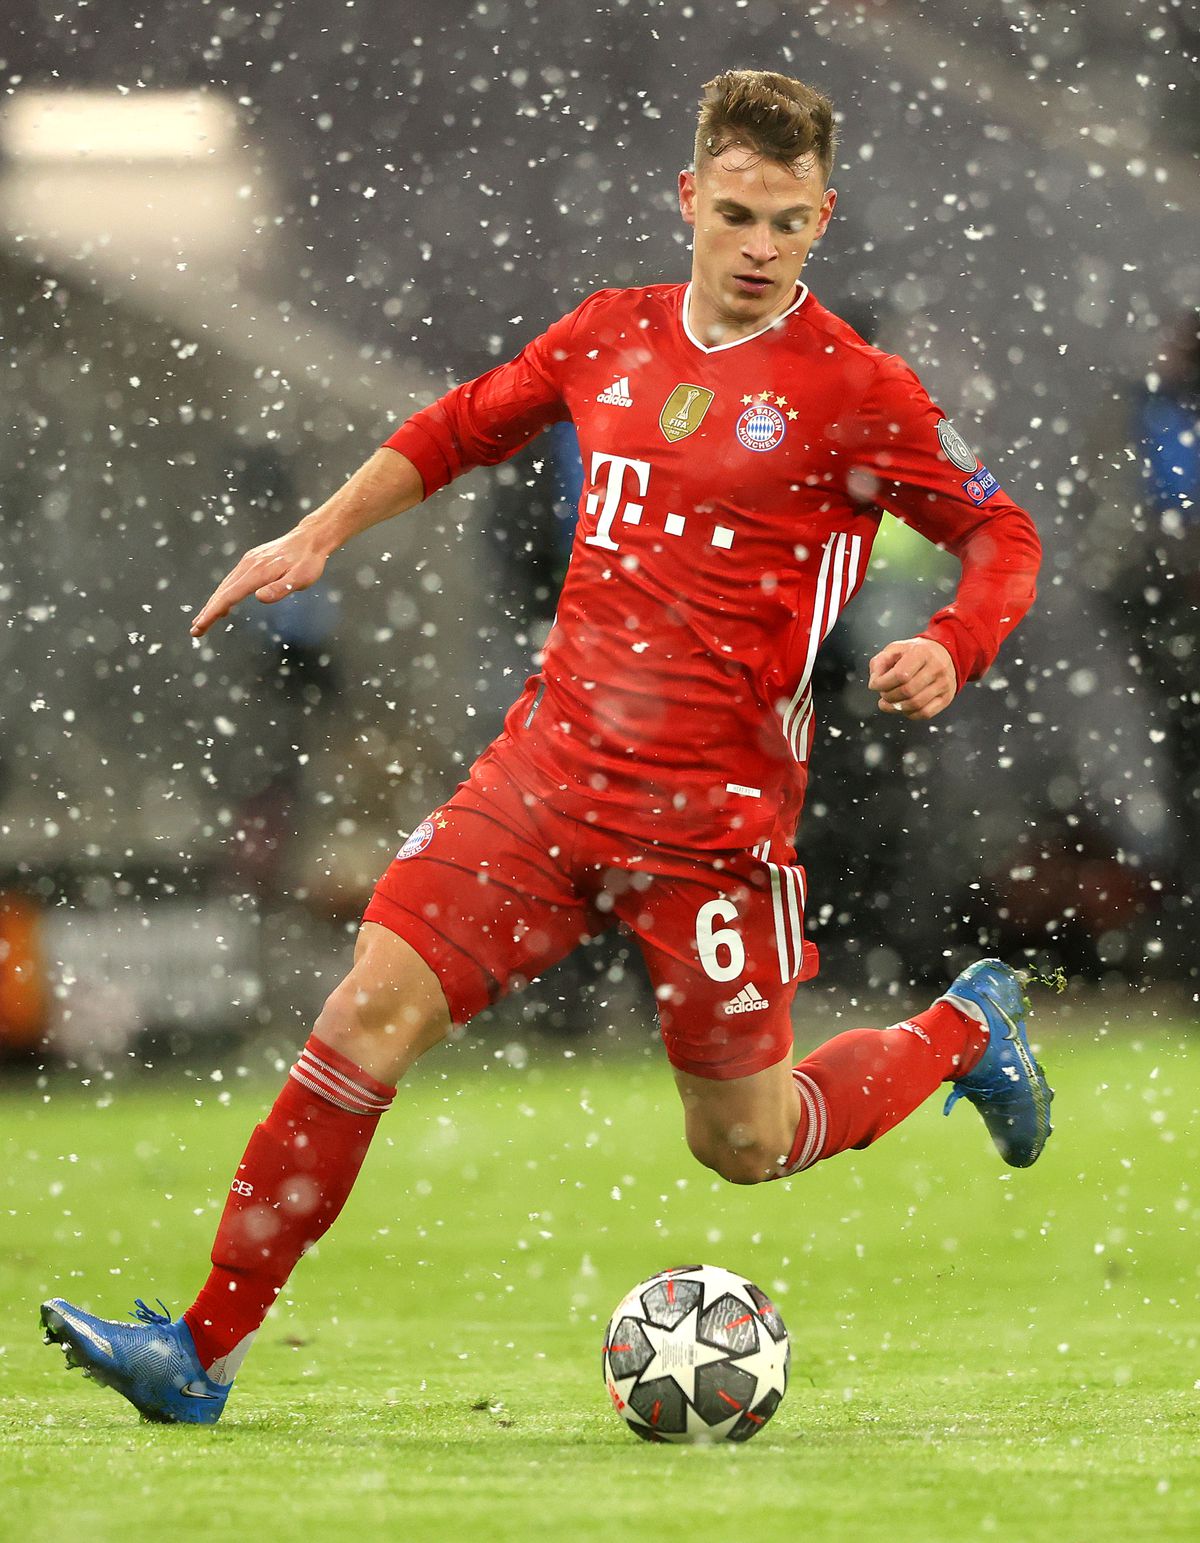 Joshua Kimmich's previous Champions League experience will guide him for Bayern Munich vs. PSG duel Football Works